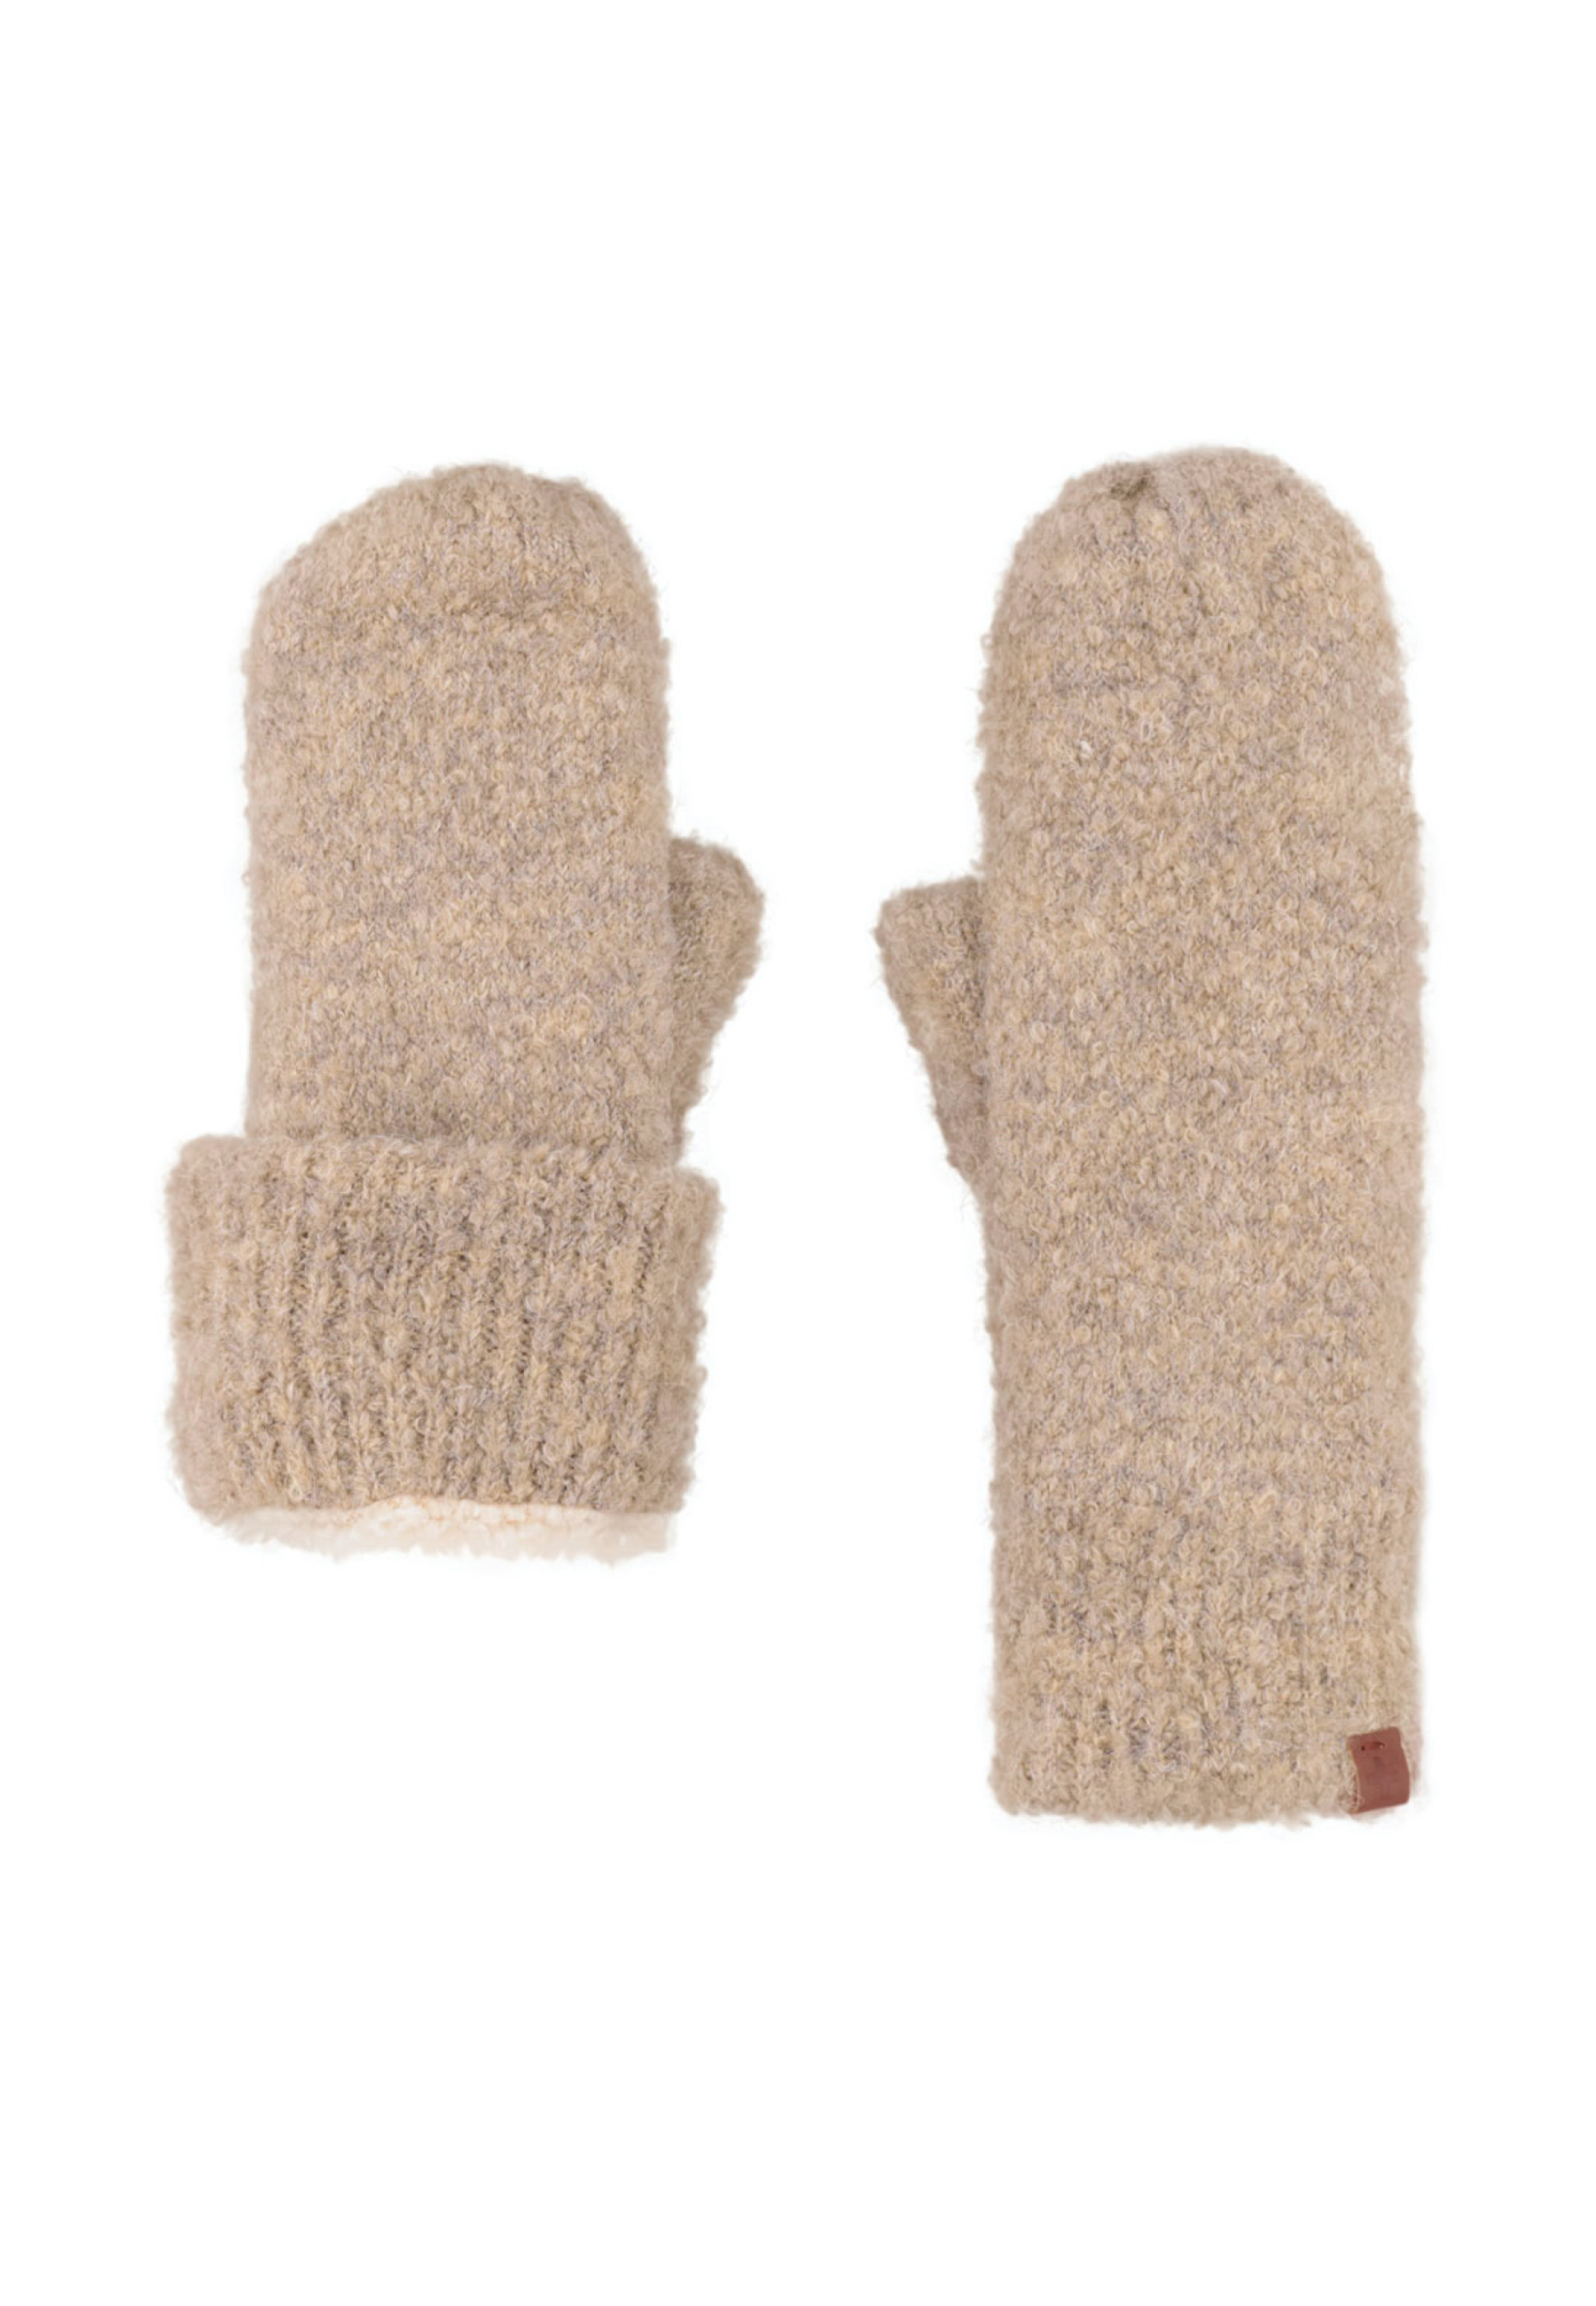 BICKLEY + MITCHELL AMSTERDAM Recycled Knit Fingerless Gloves/ Mittens